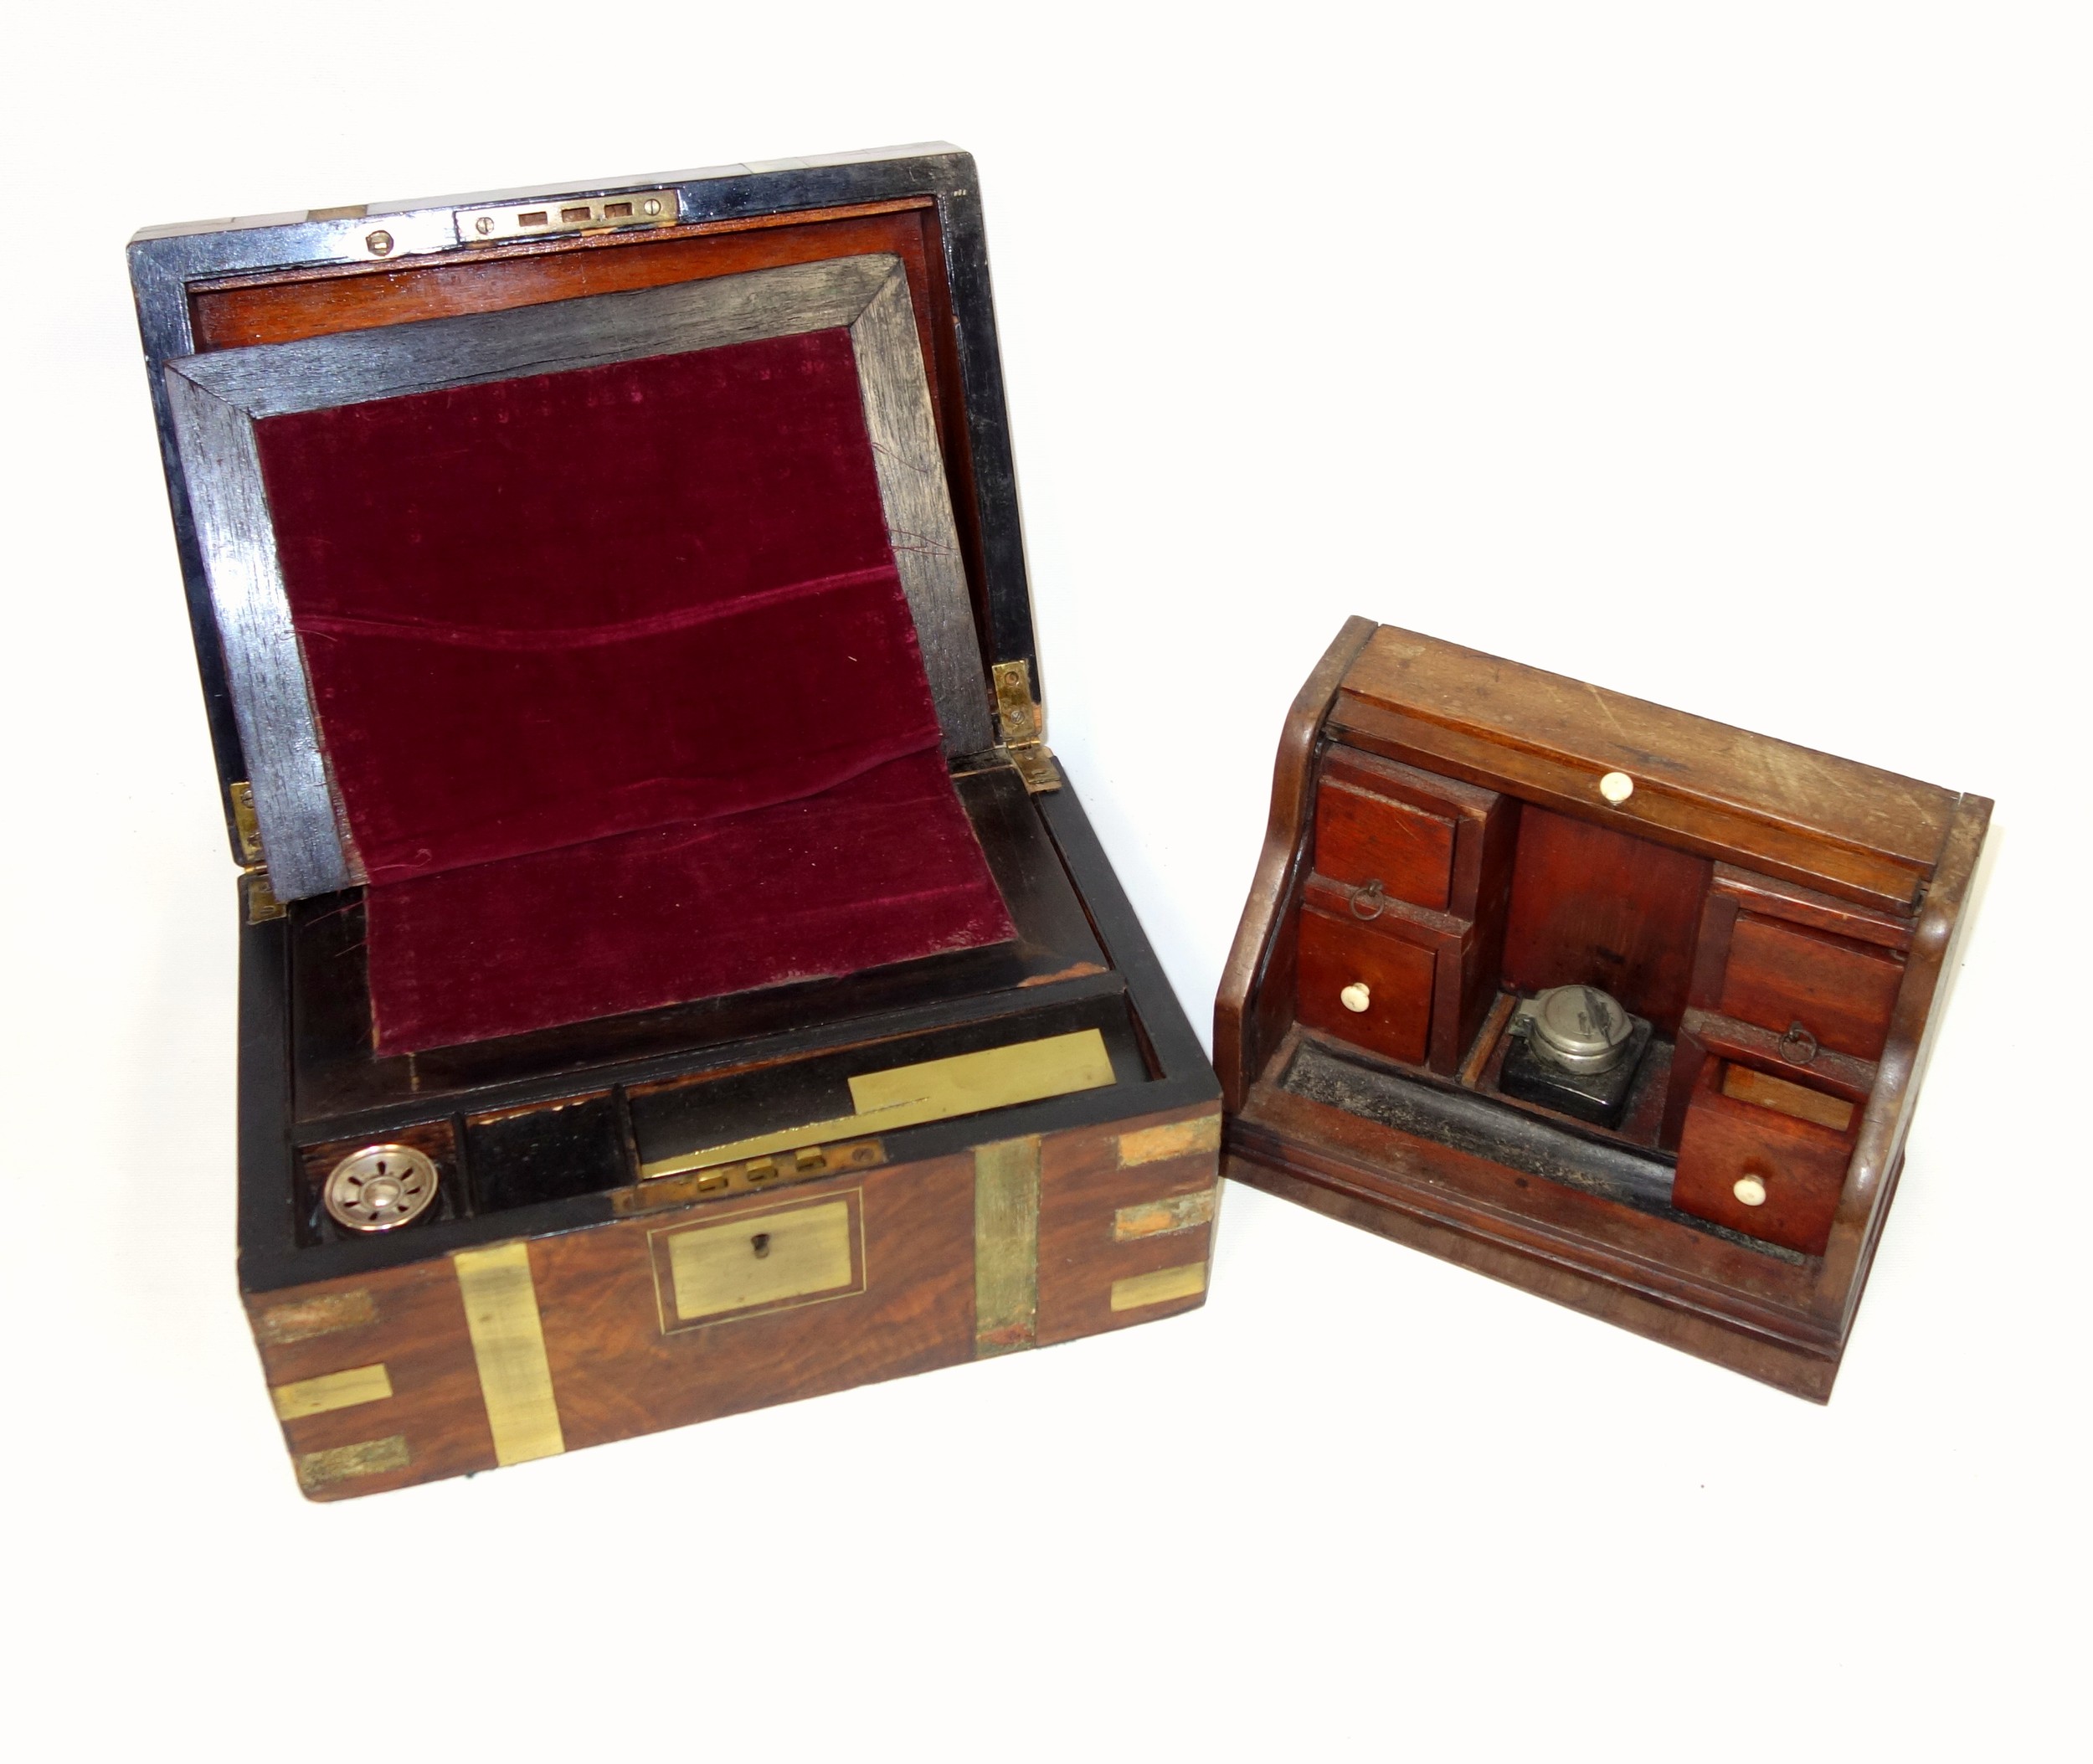 Victorian brass inlaid rosewood portable writing desk with 2 brass covered wells and secret panel - Image 11 of 14